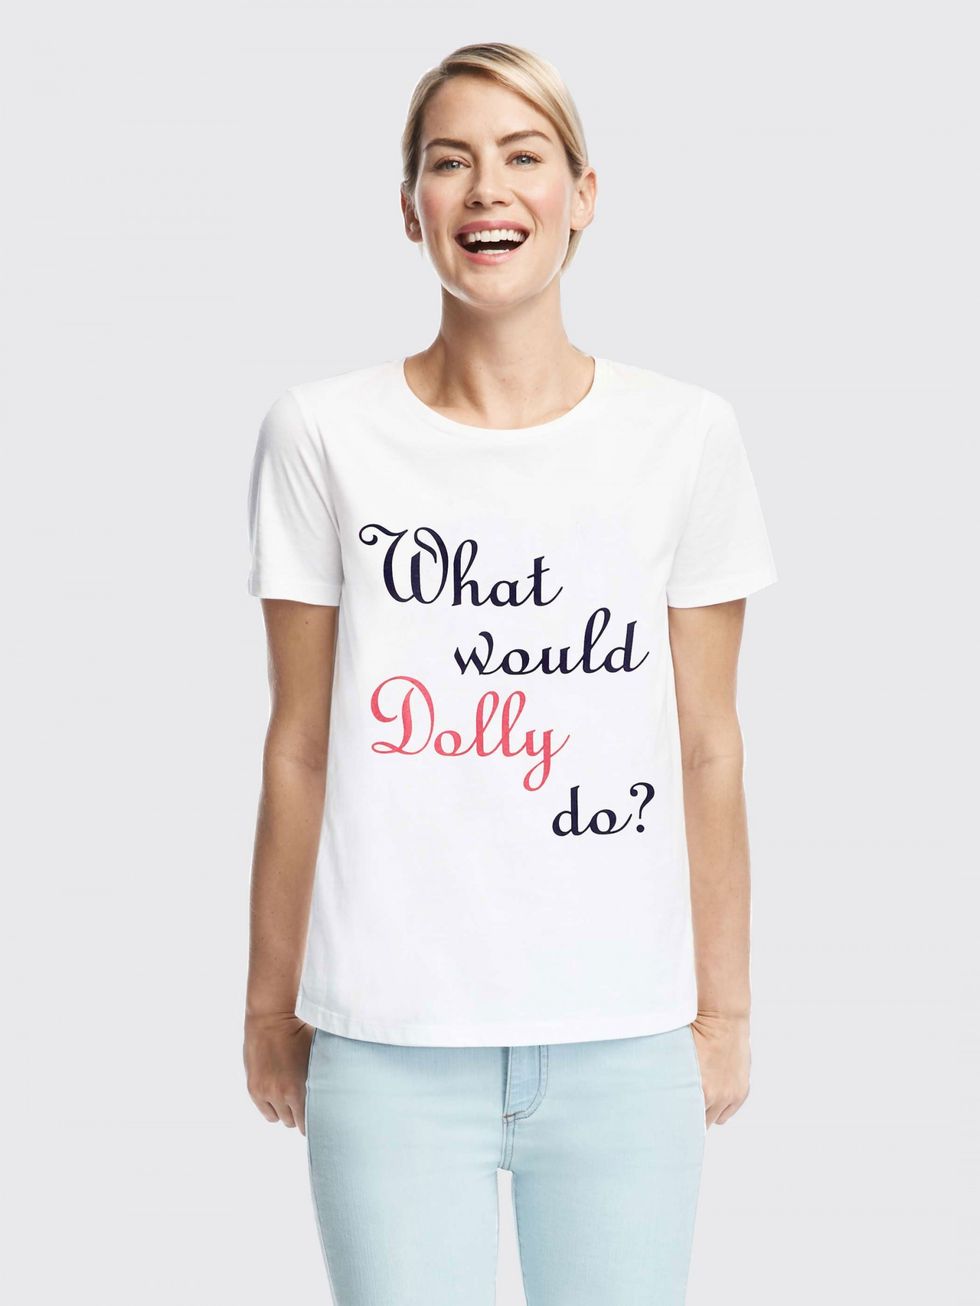 T-shirt, White, Clothing, Facial expression, Product, Text, Shoulder, Top, Neck, Sleeve, 